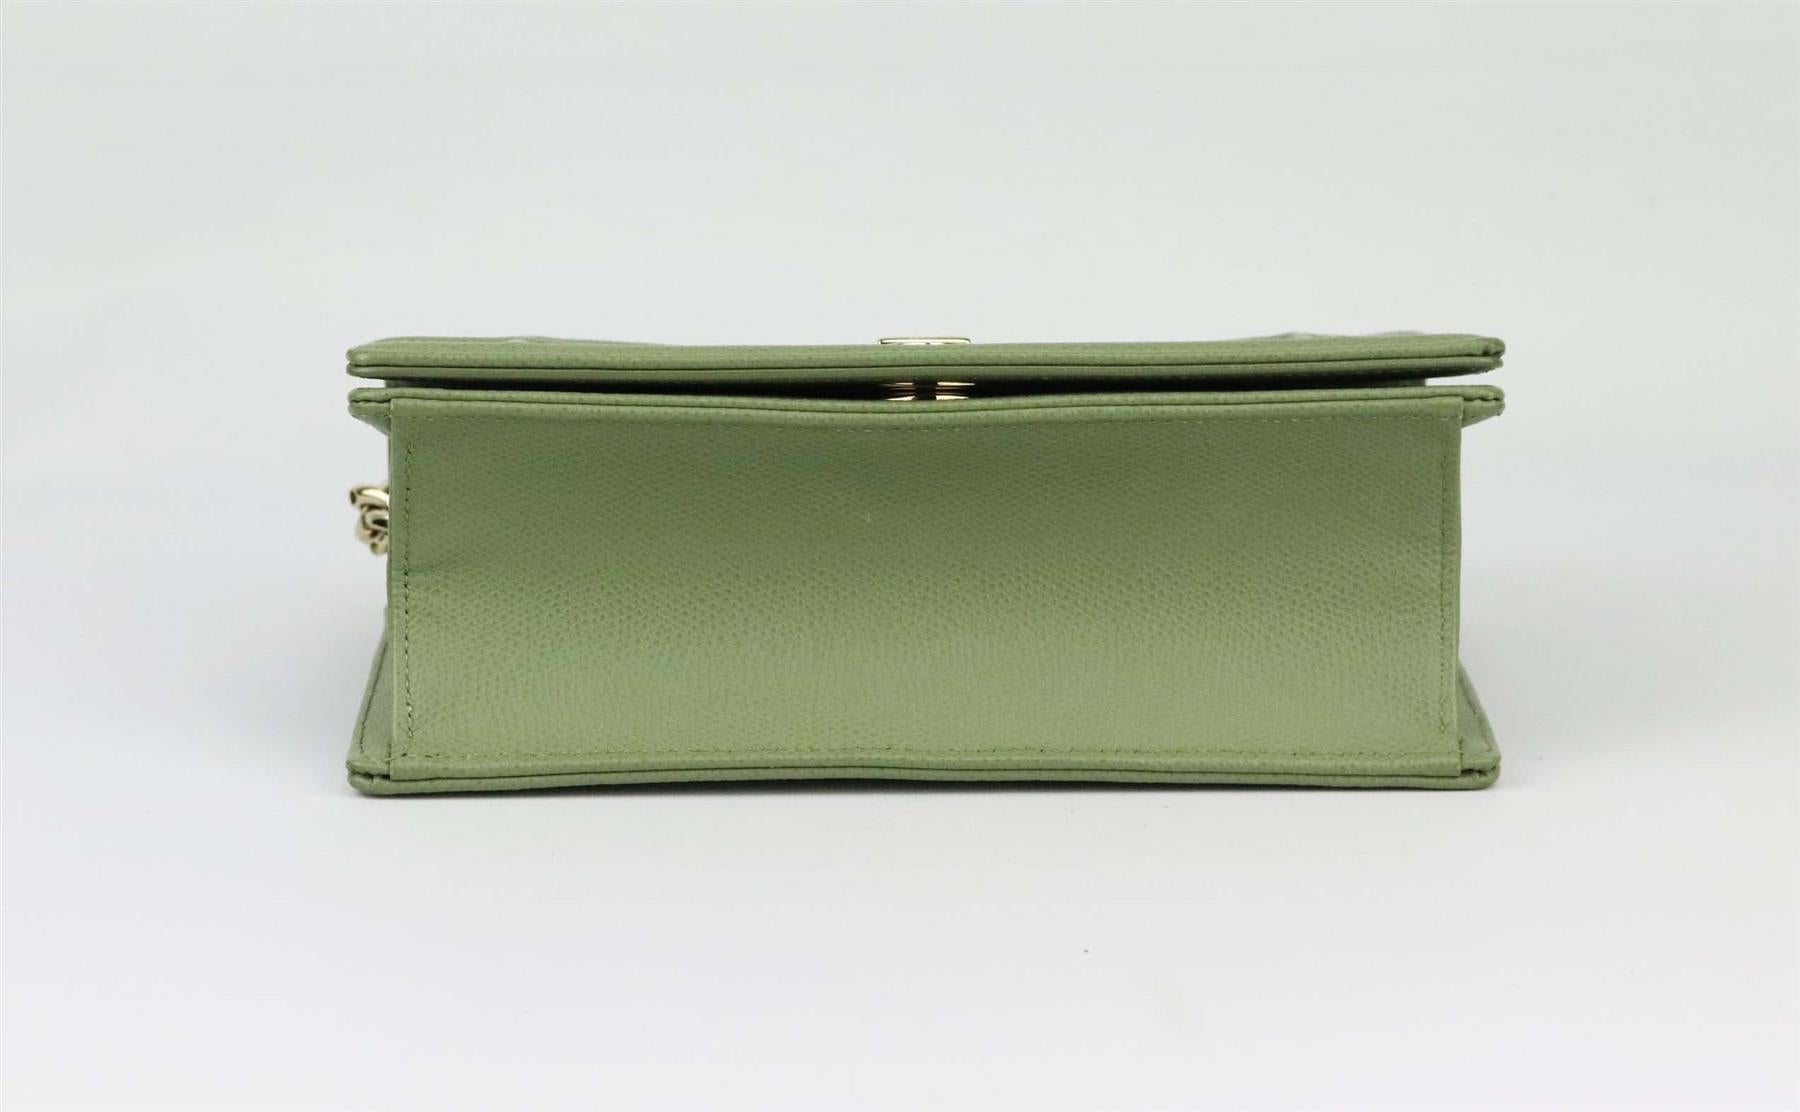 Christian Dior Diorama Small Leather Shoulder Bag  In Excellent Condition For Sale In London, GB